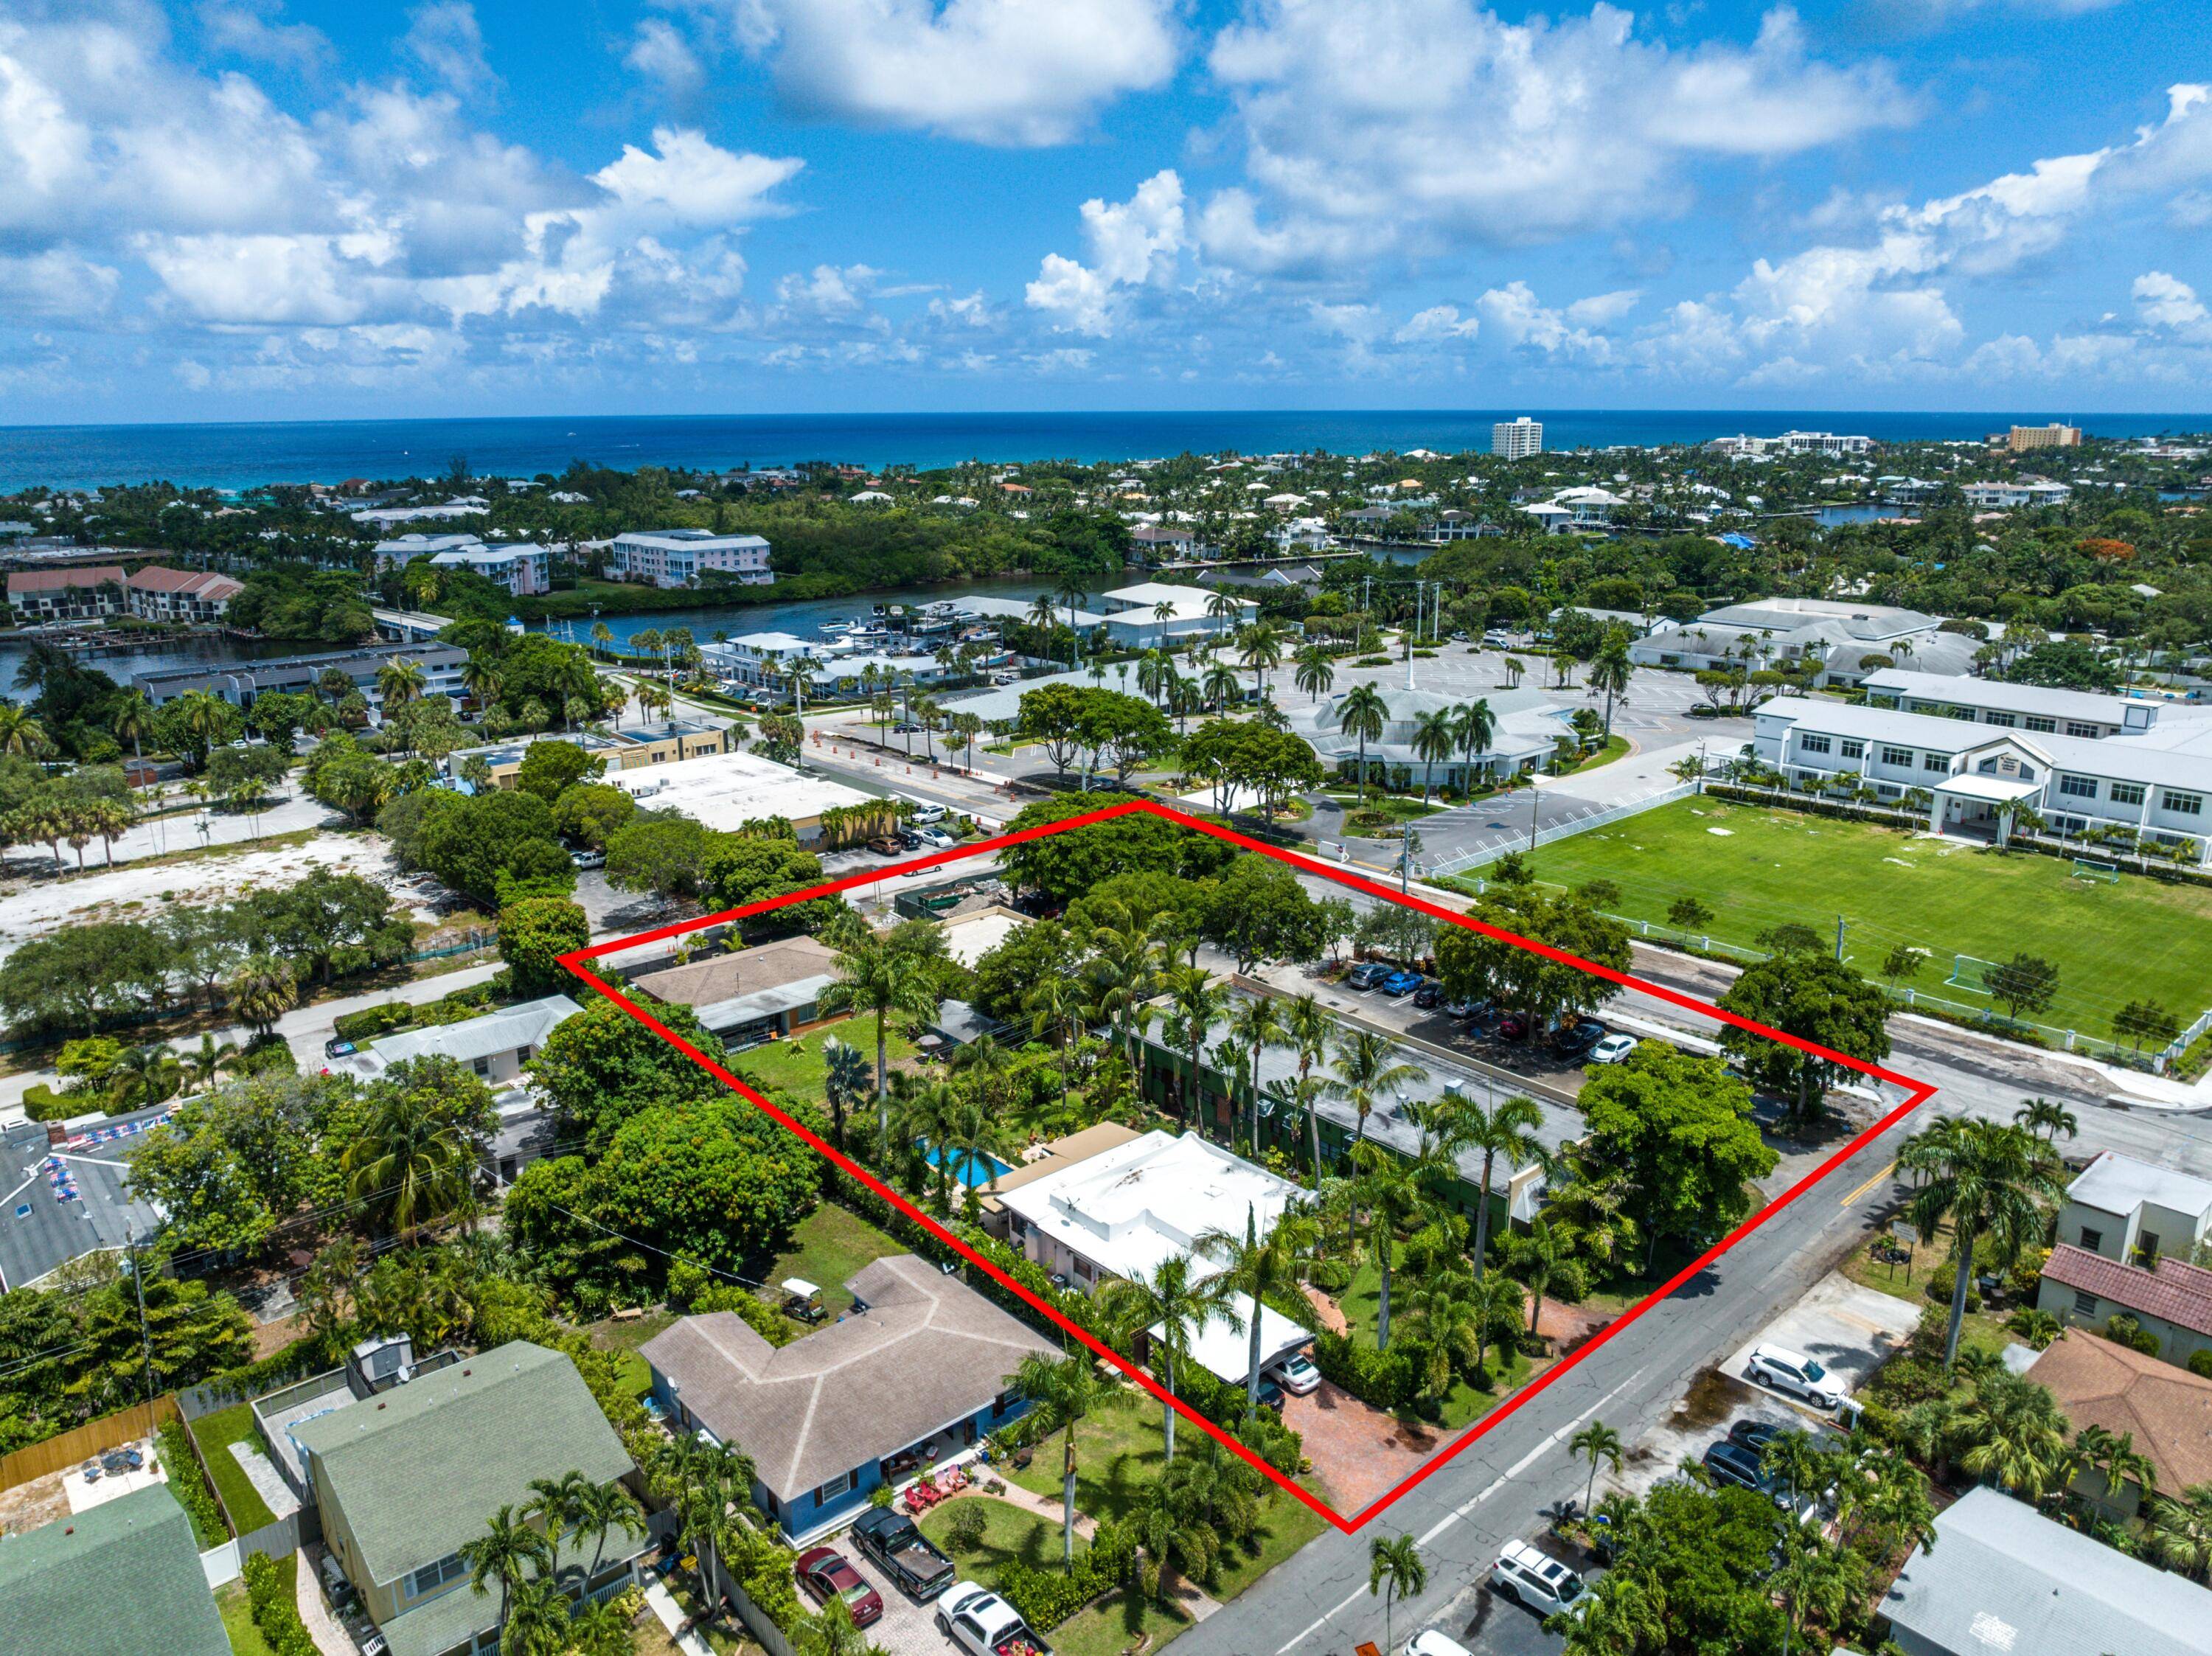 THIS PIECE OF LAND IS IN THE HEART OF DELRAY BEACH FLORIDA.